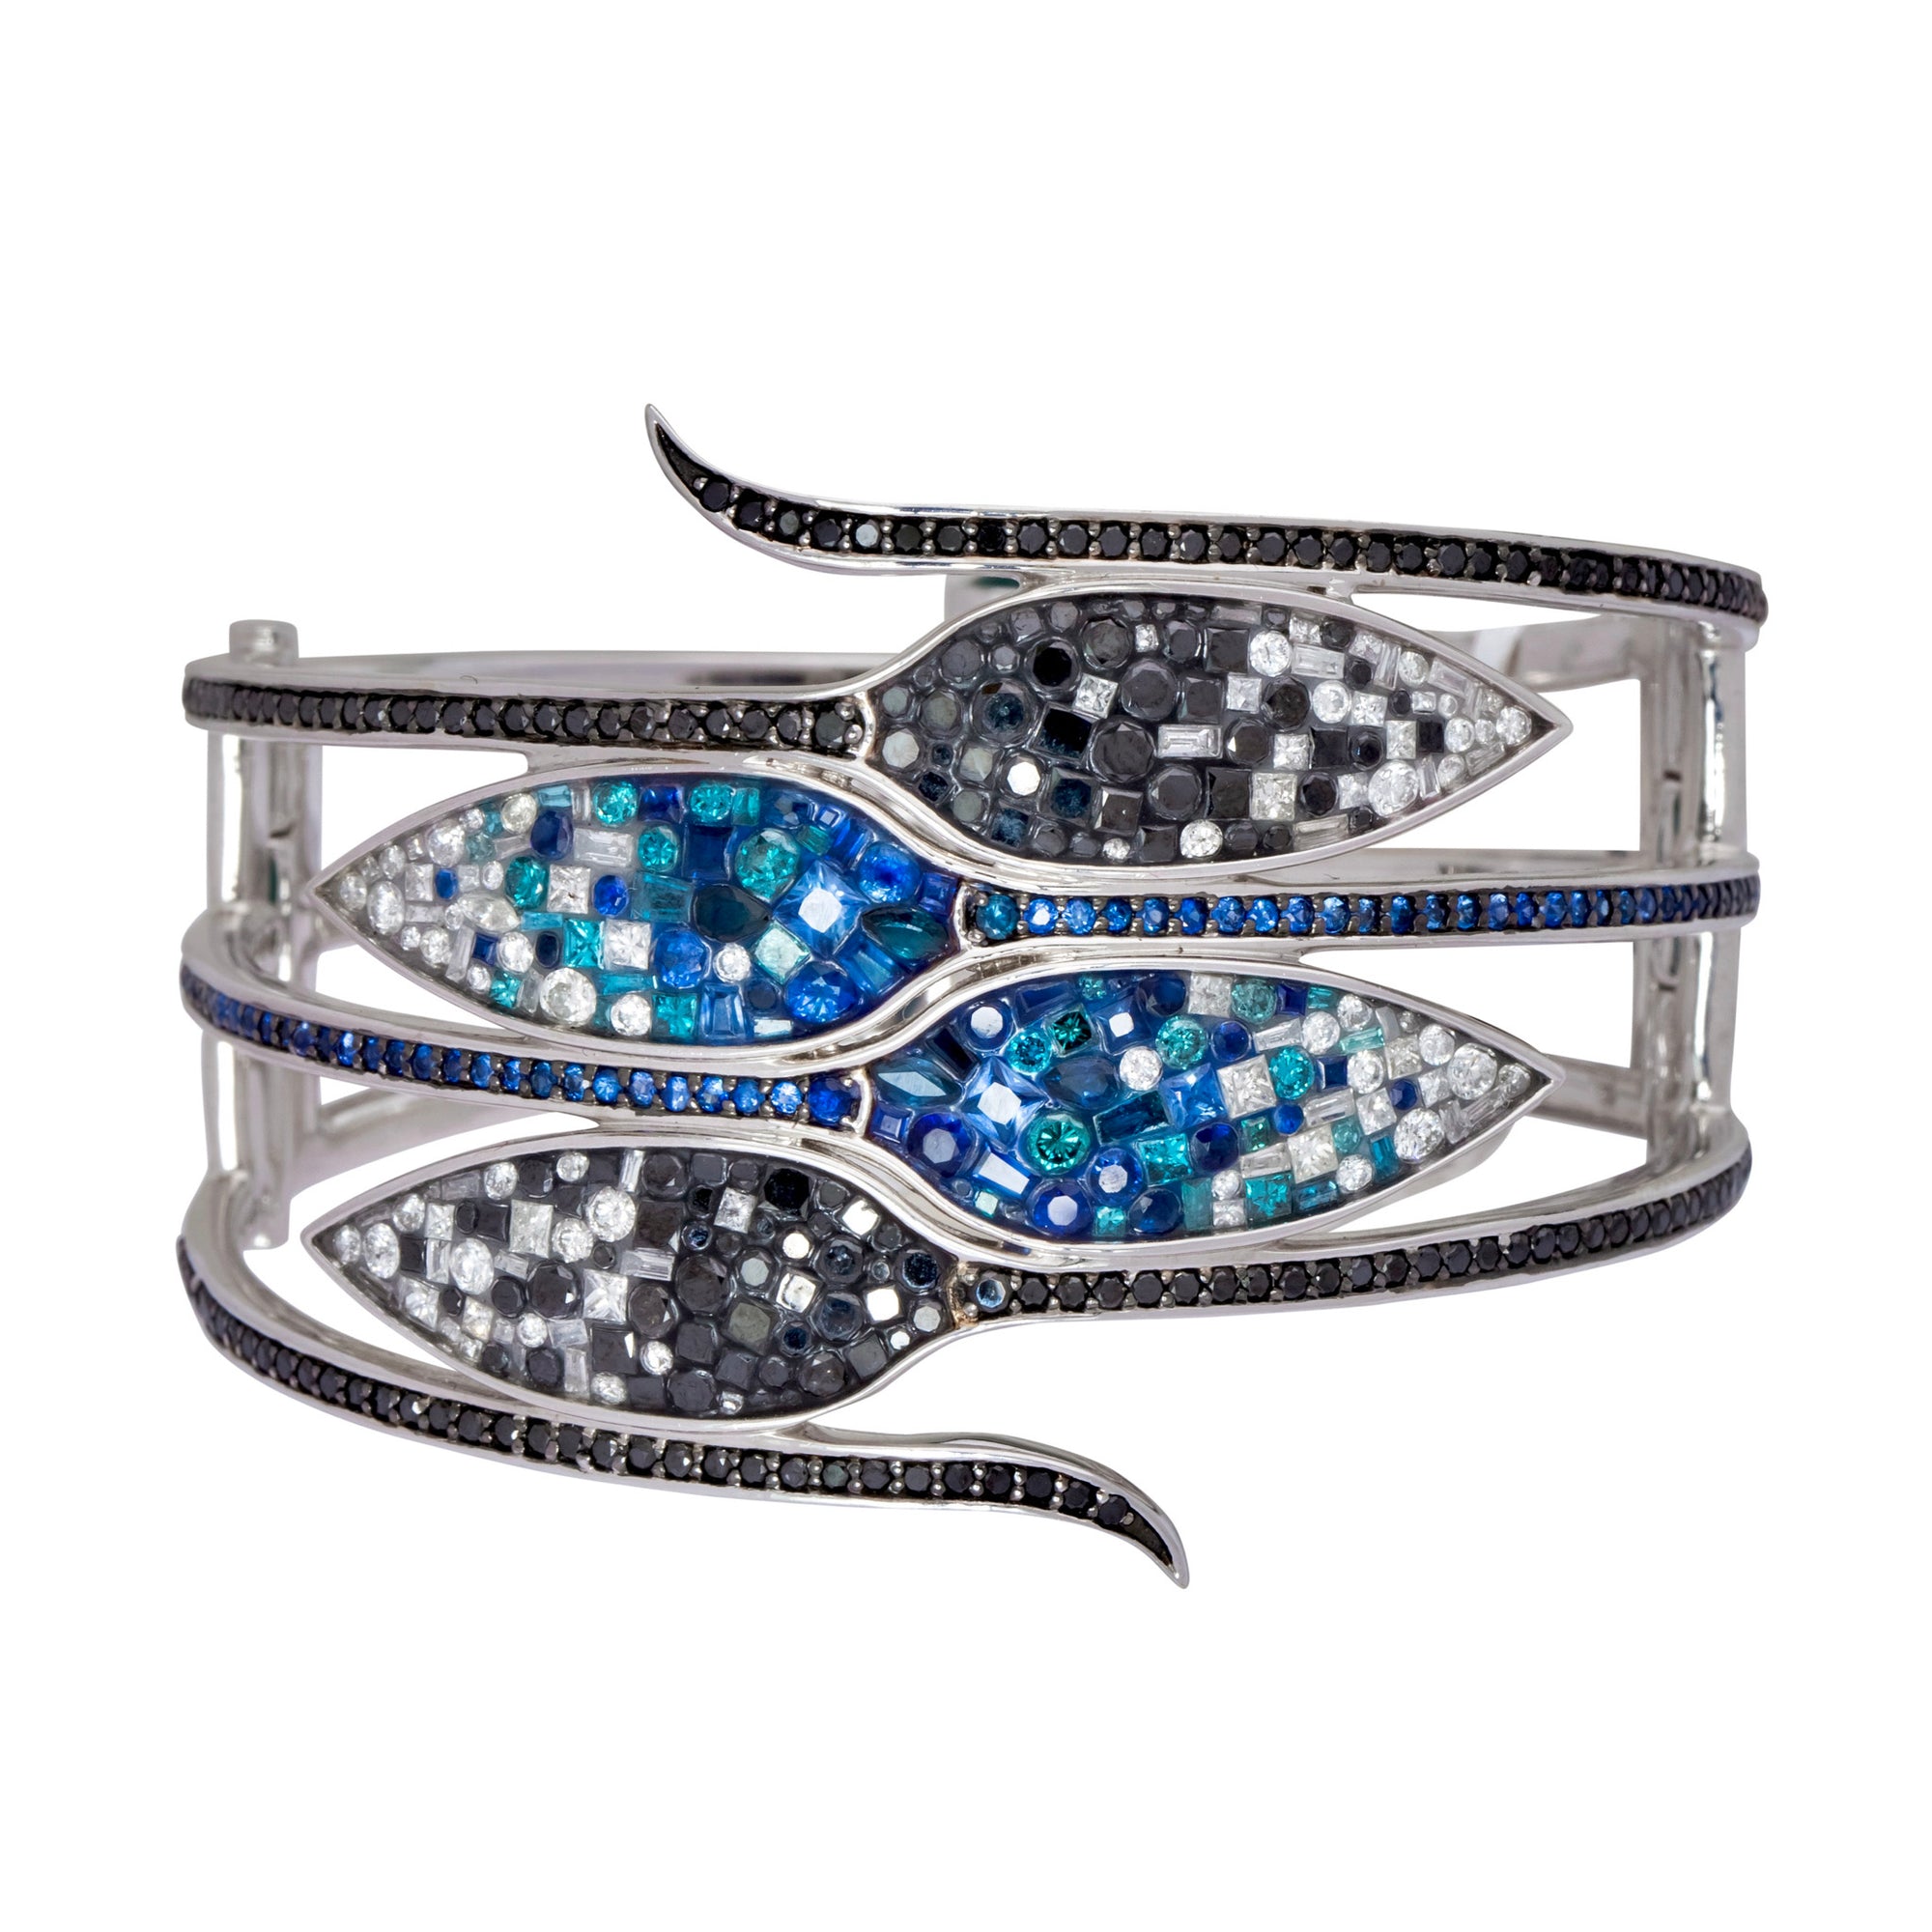 Ombre Double Snake Sapphire & Diamond Bracelet available at Talisman Collection Fine Jewelers in El Dorado Hills, CA and online. Specs: Natural sapphires, white diamonds & color enhanced diamonds - 9.50 cttw. 18k white gold.